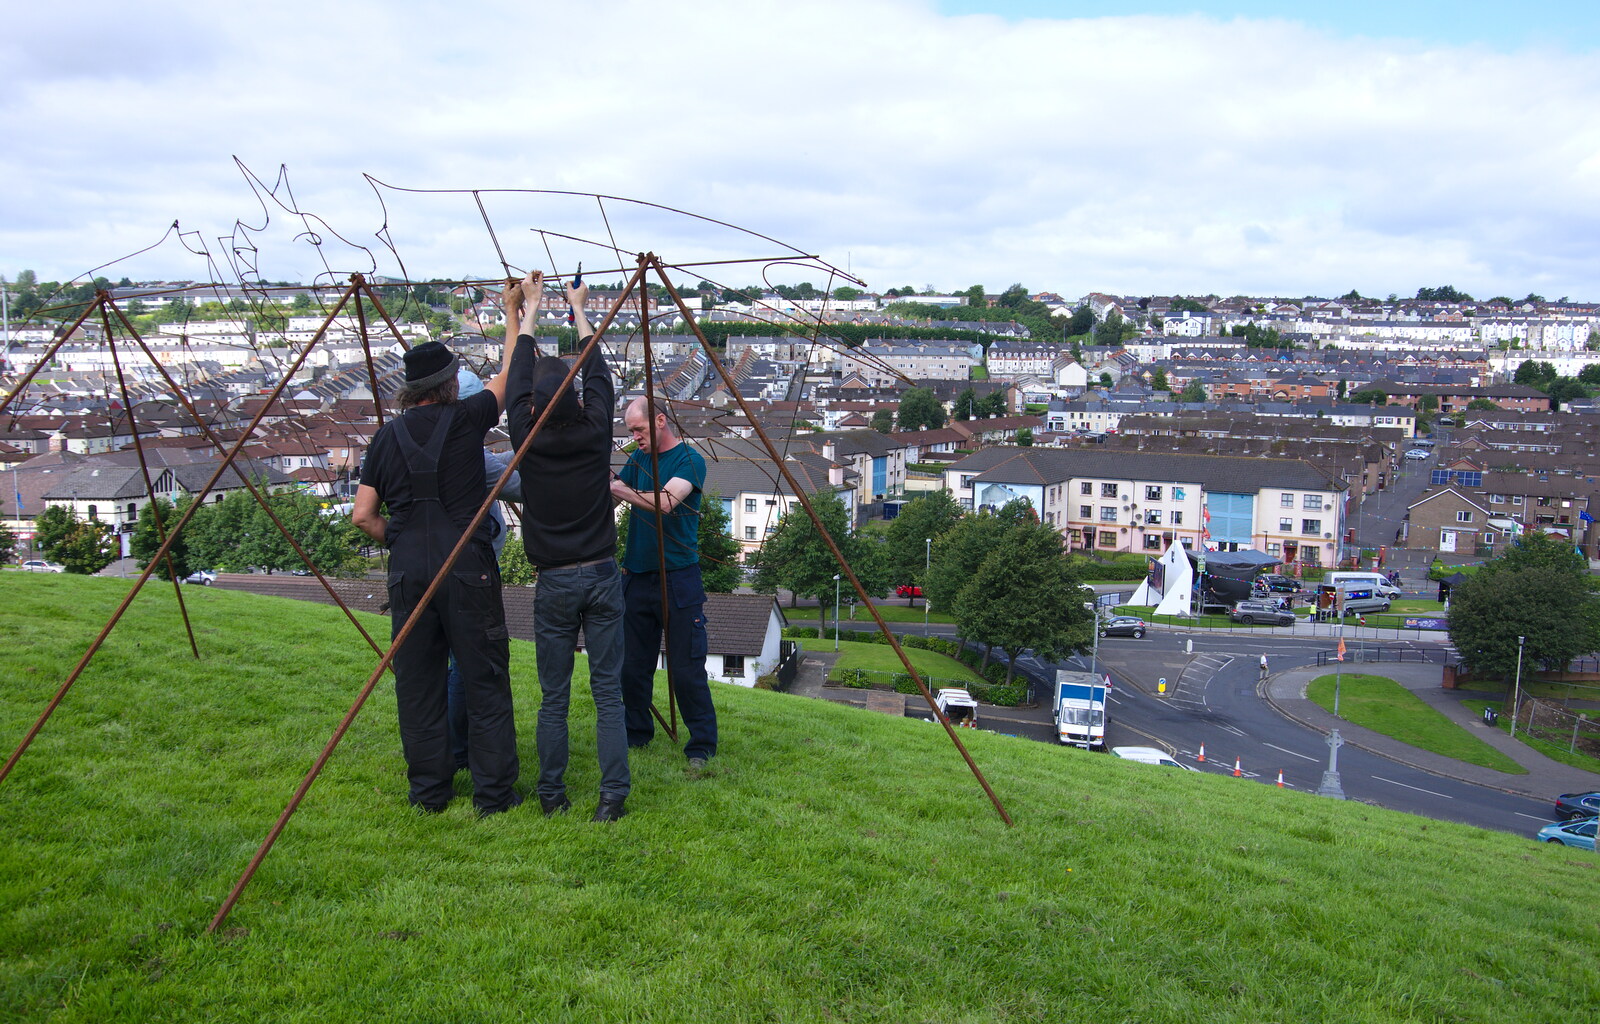 Some dudes set up a firework dragon from A Day in Derry, County Londonderry, Northern Ireland - 15th August 2019